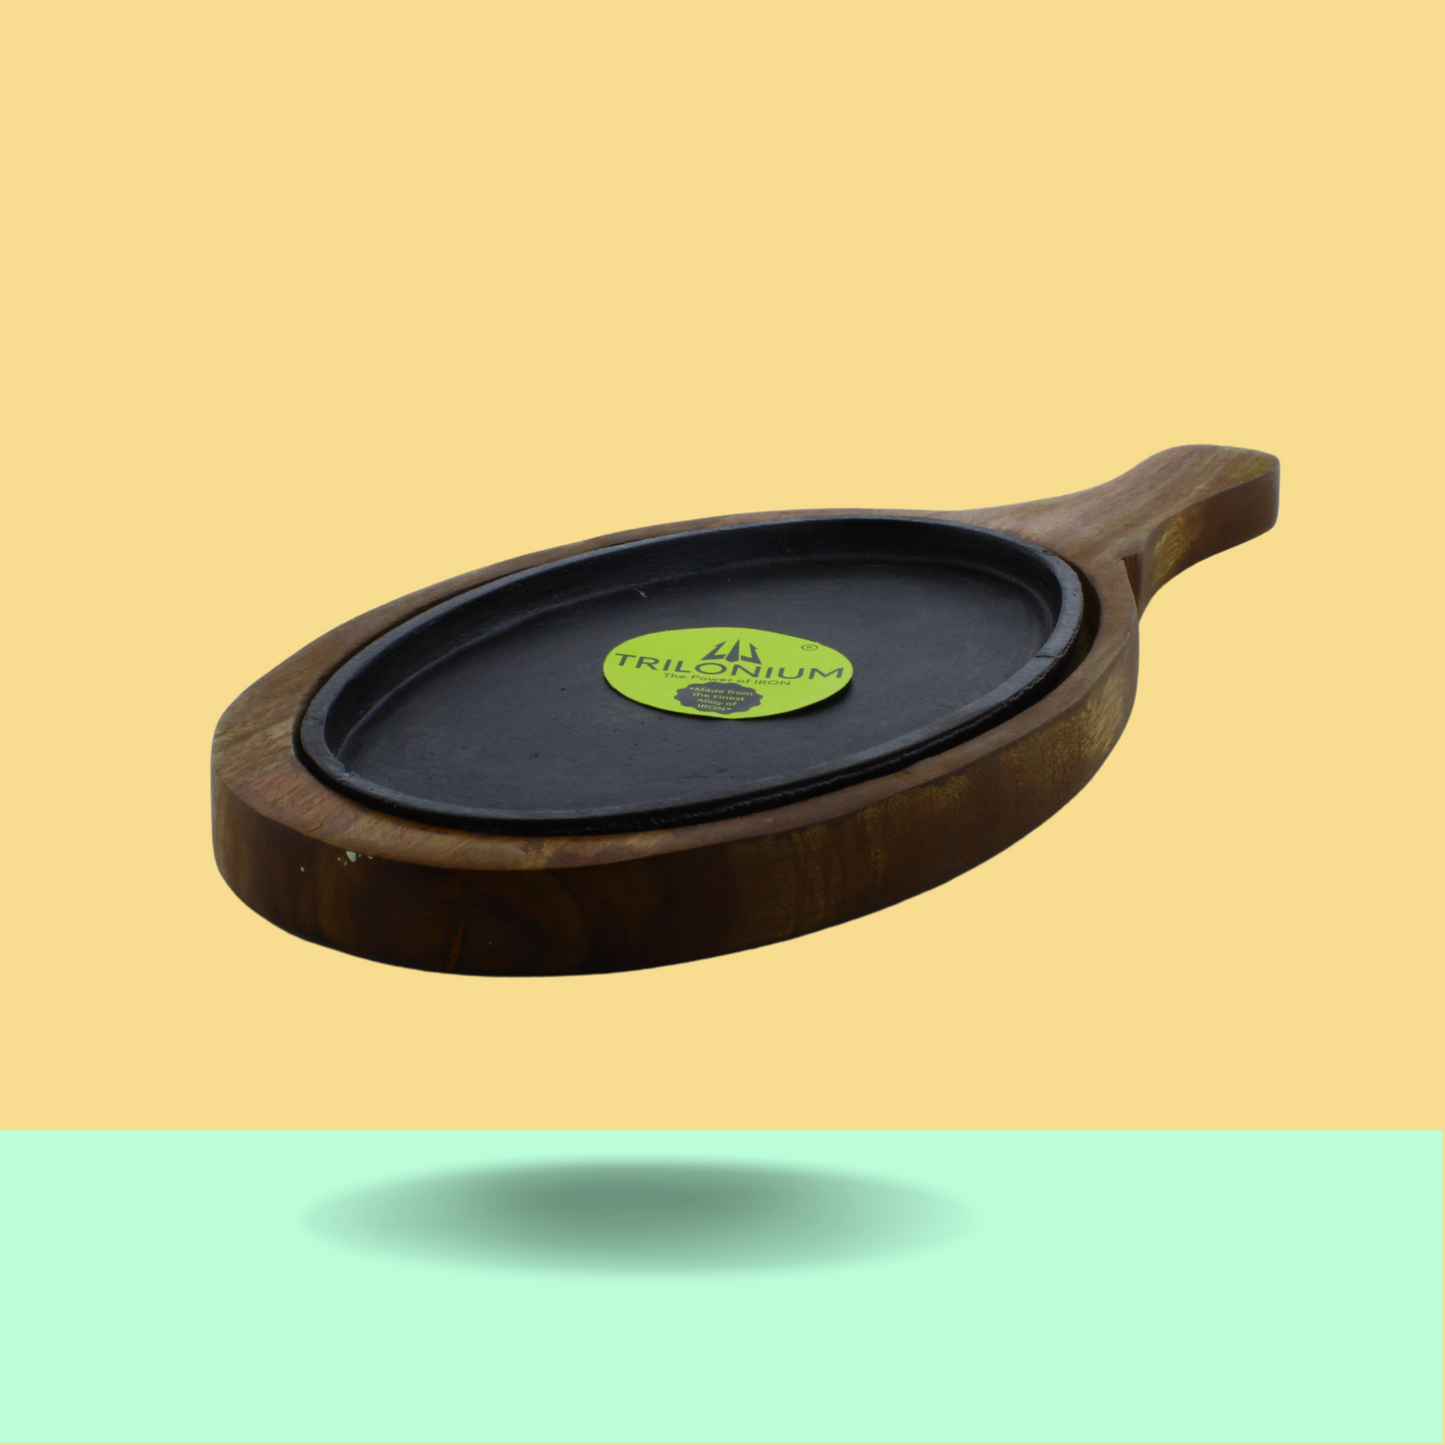 Trilonium Pre-Seasoned Cast Iron Sizzler Plate With Wooden Base | Oval | 1.23 Kgs